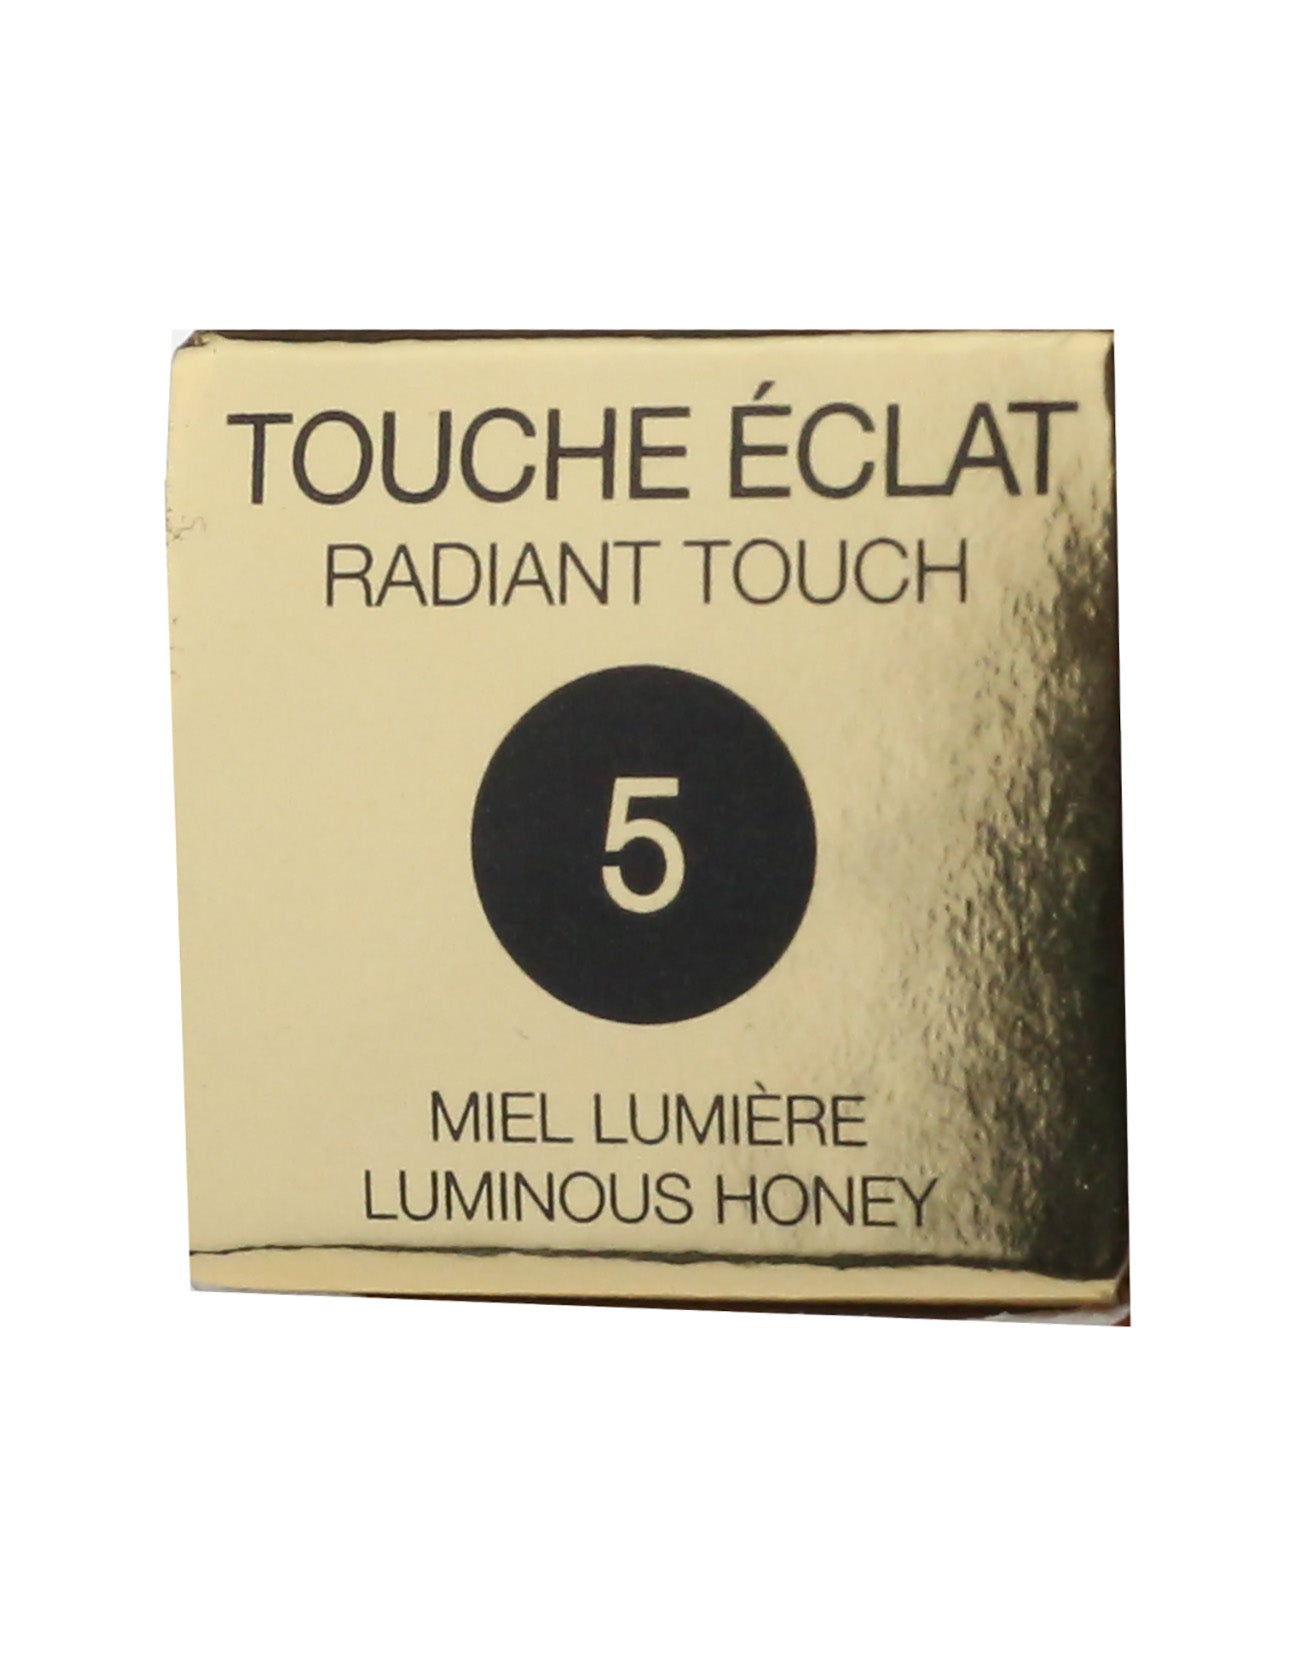 Touche Eclat Radiant Touch 2.5 ml